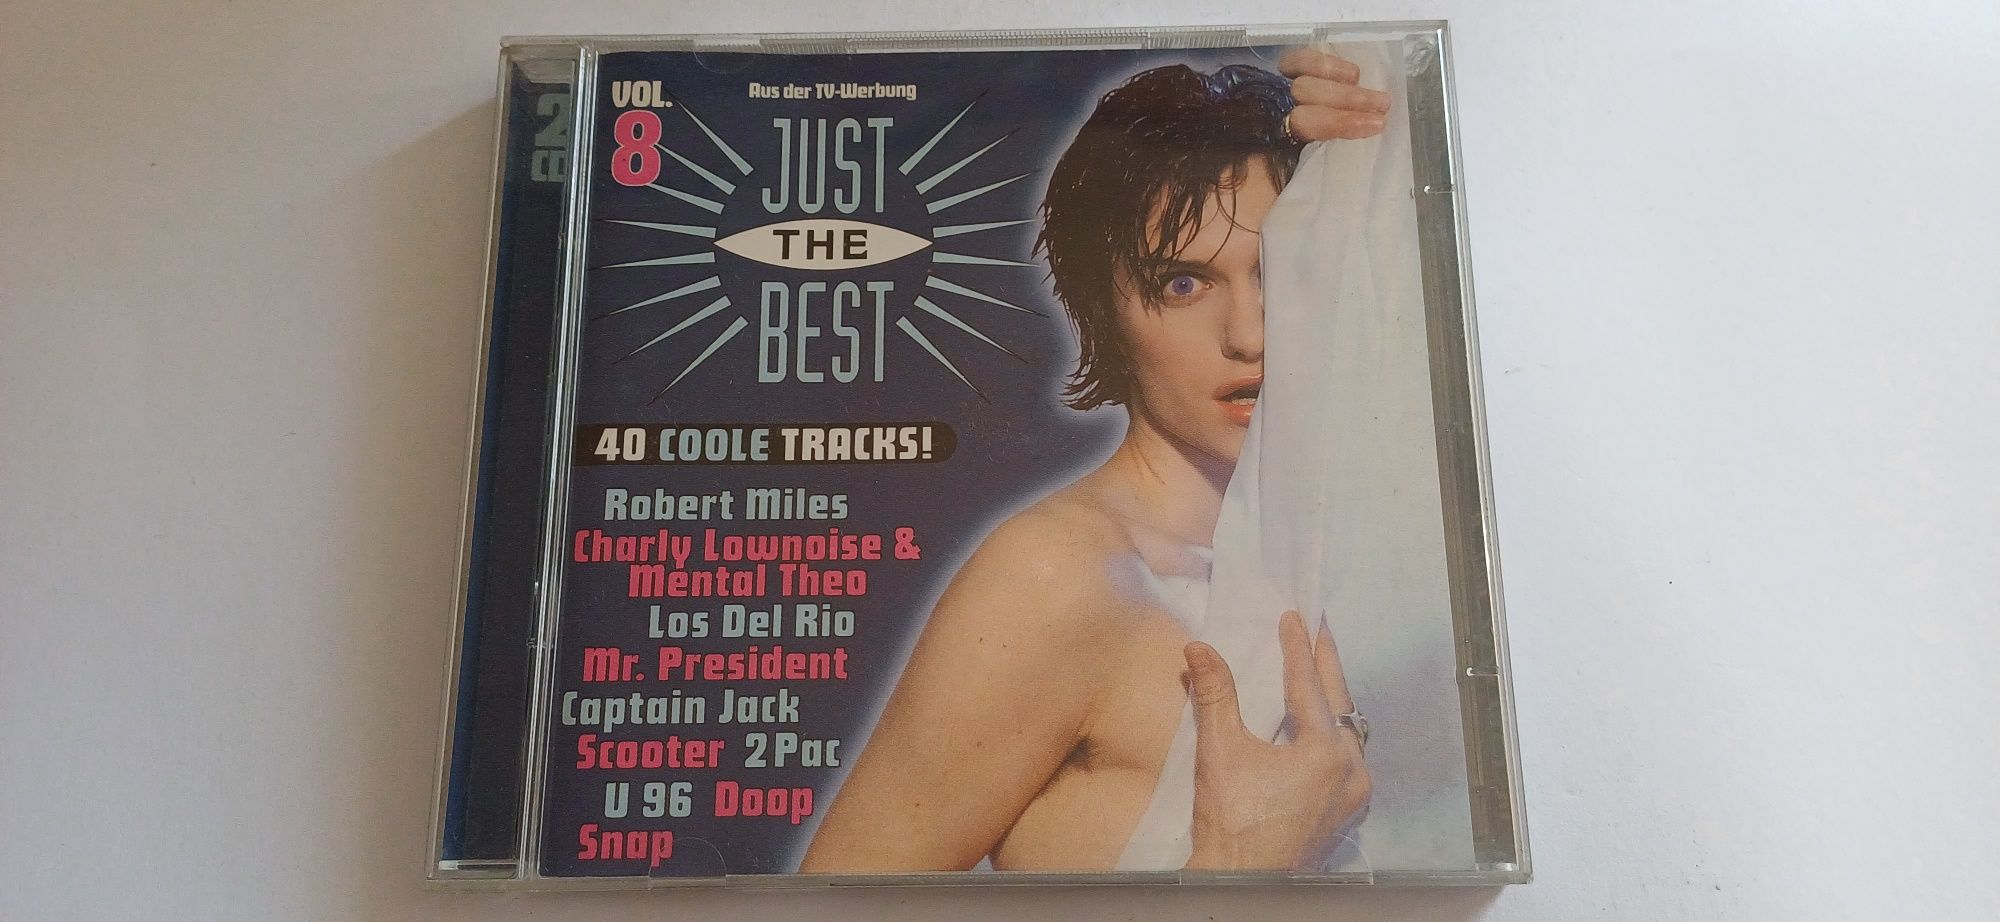 Just The Best Vol. 8 Various Artists 2CD